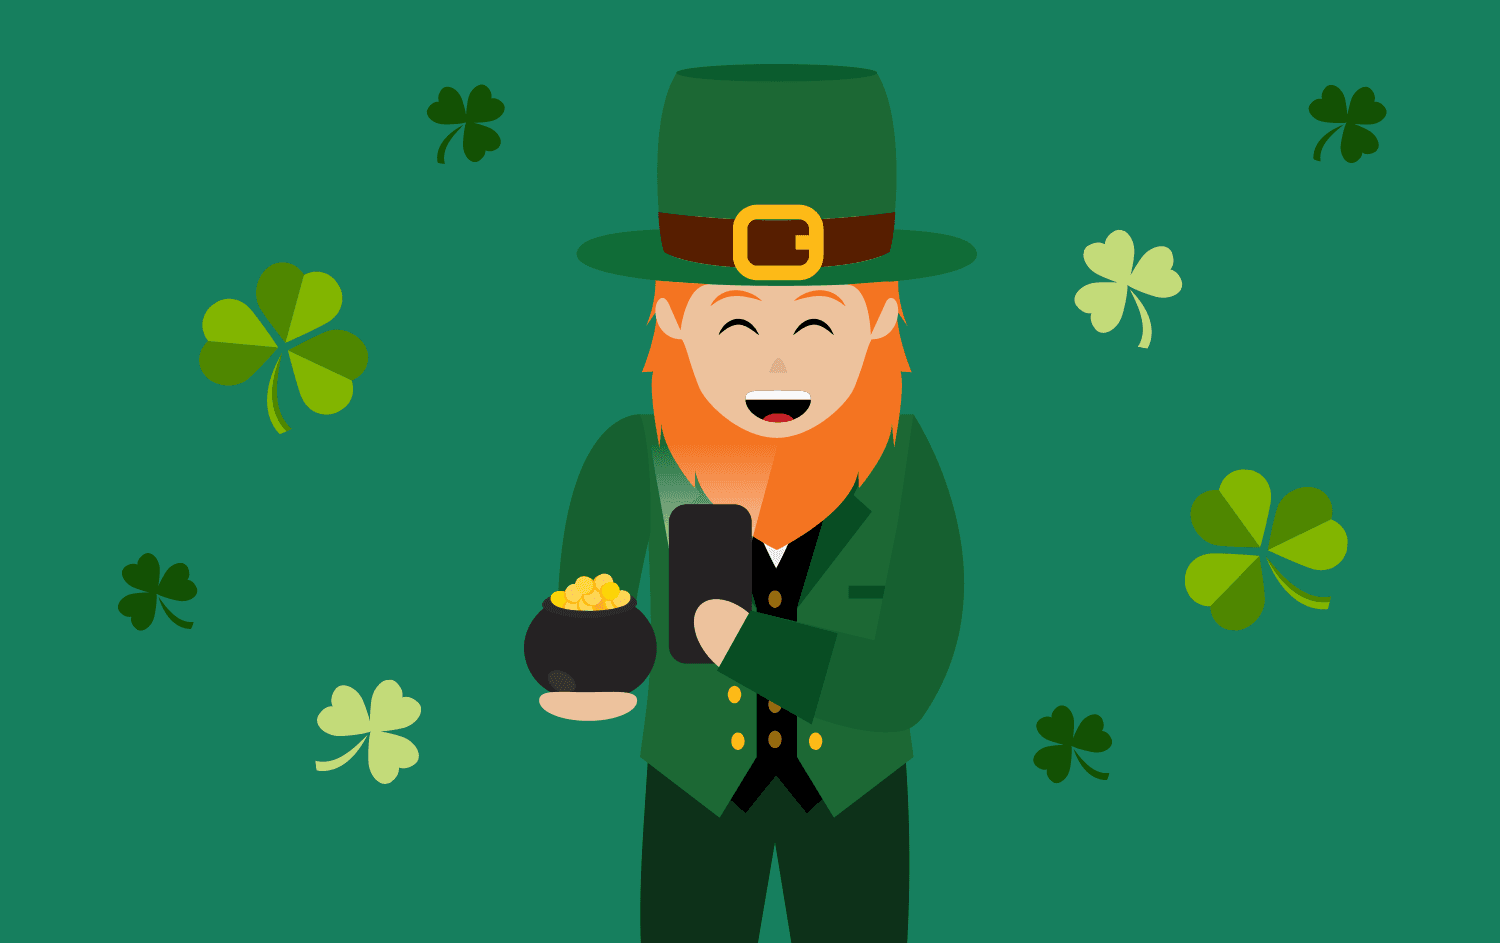 Leprechaun texting with pot of gold and clovers